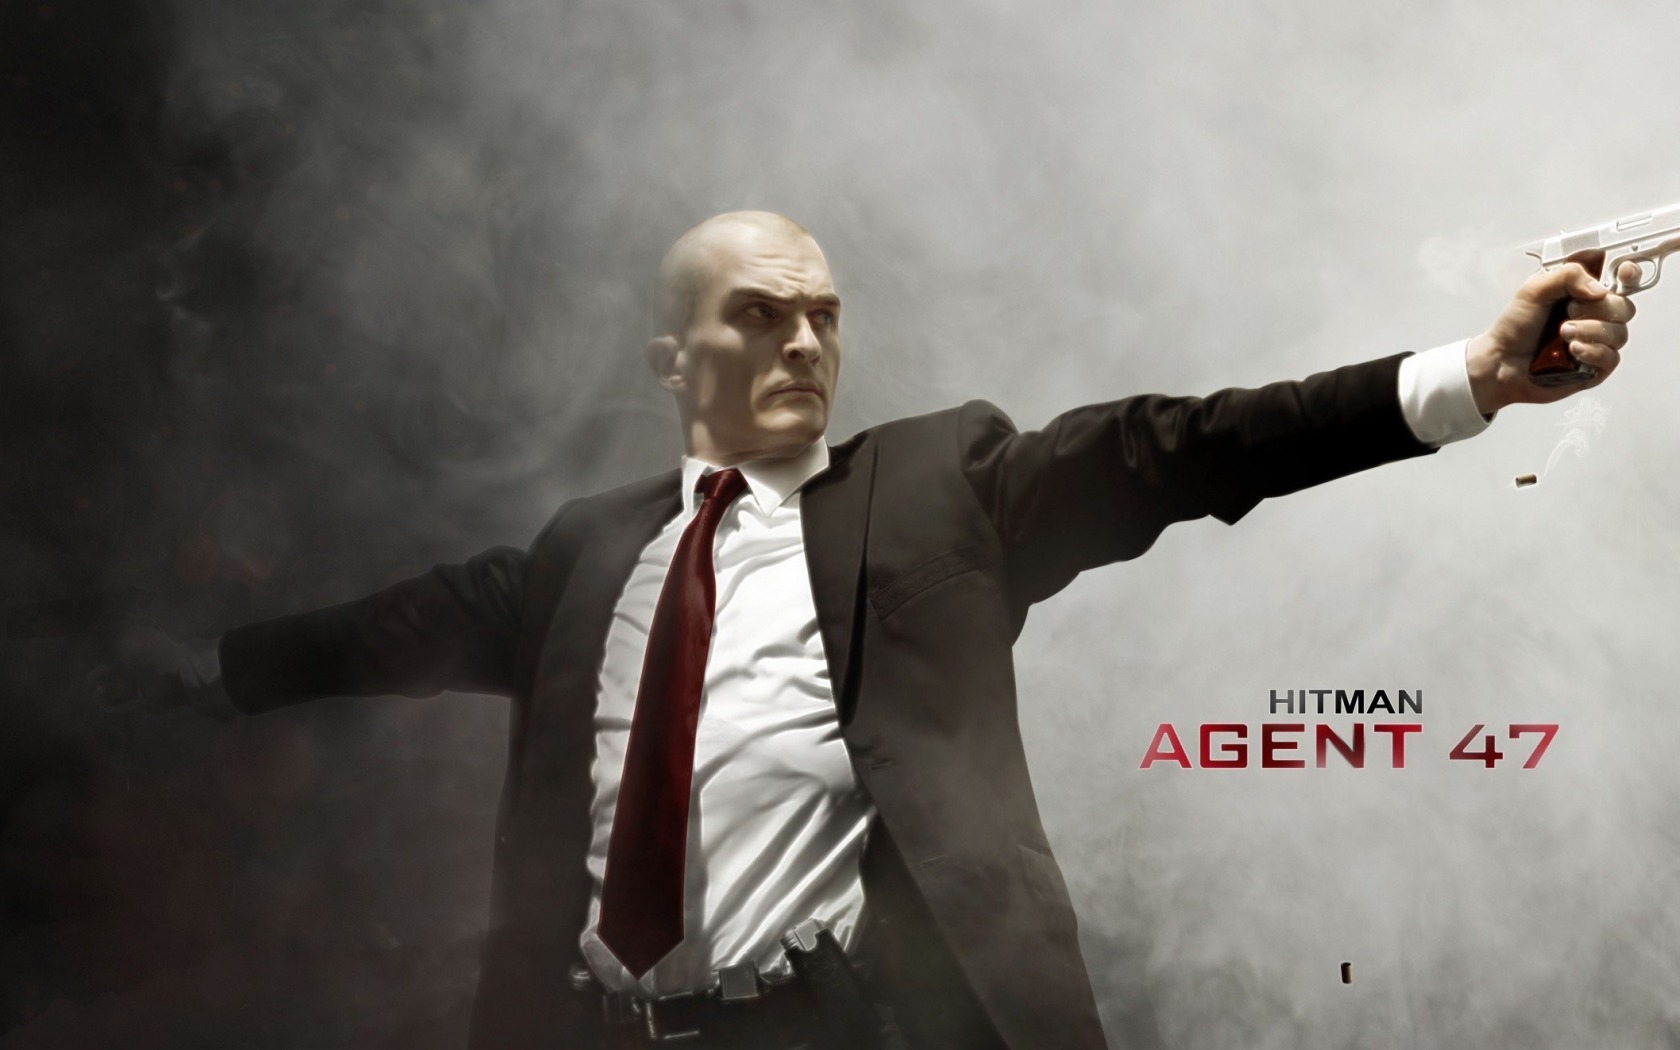 HQ Hitman: Agent 47 Wallpapers | File 178.21Kb